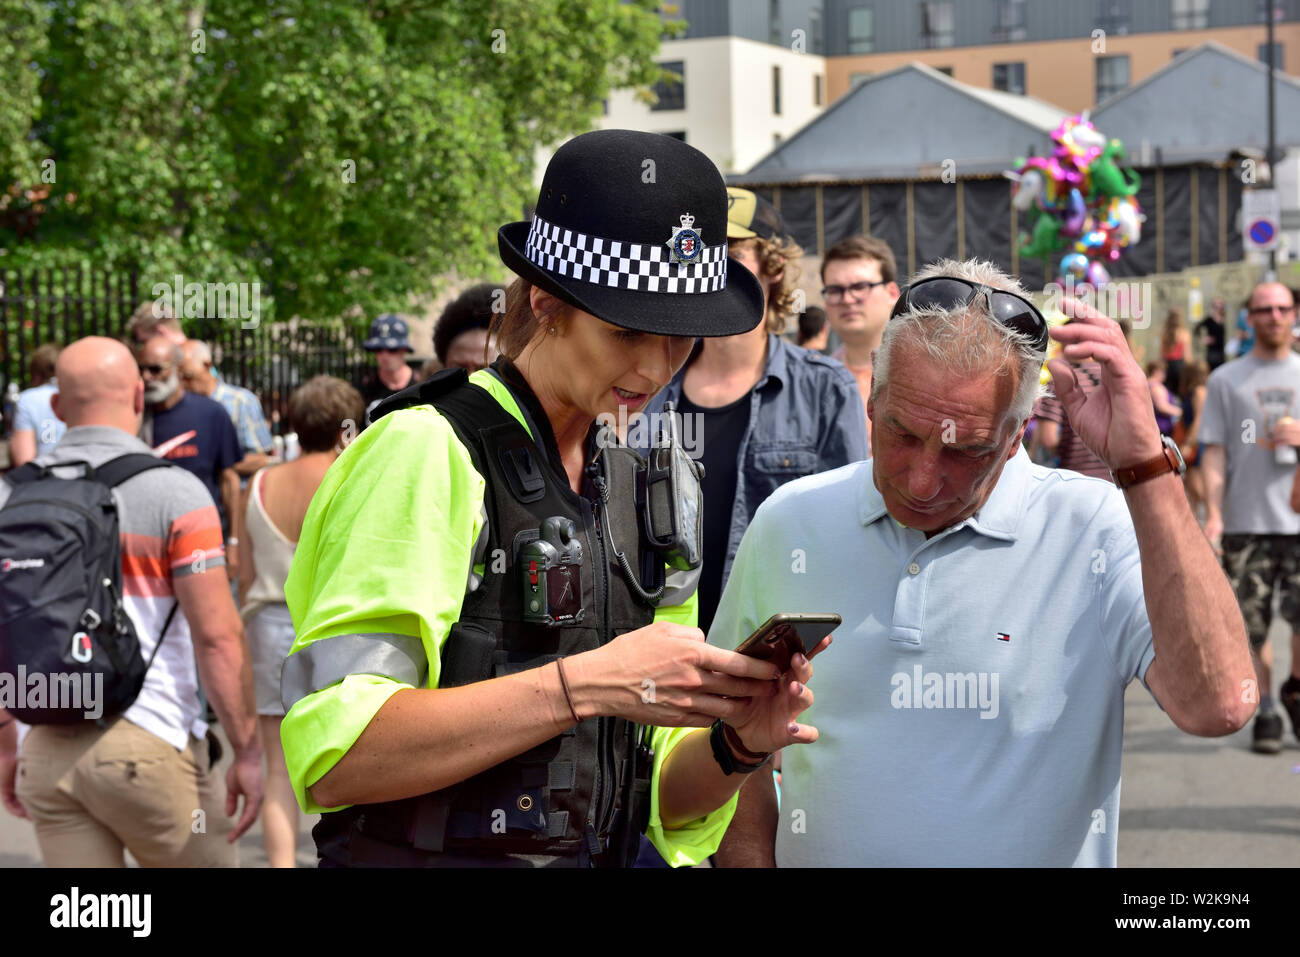 Police woman helping man with map and directions on mobile phone, UK Stock Photo